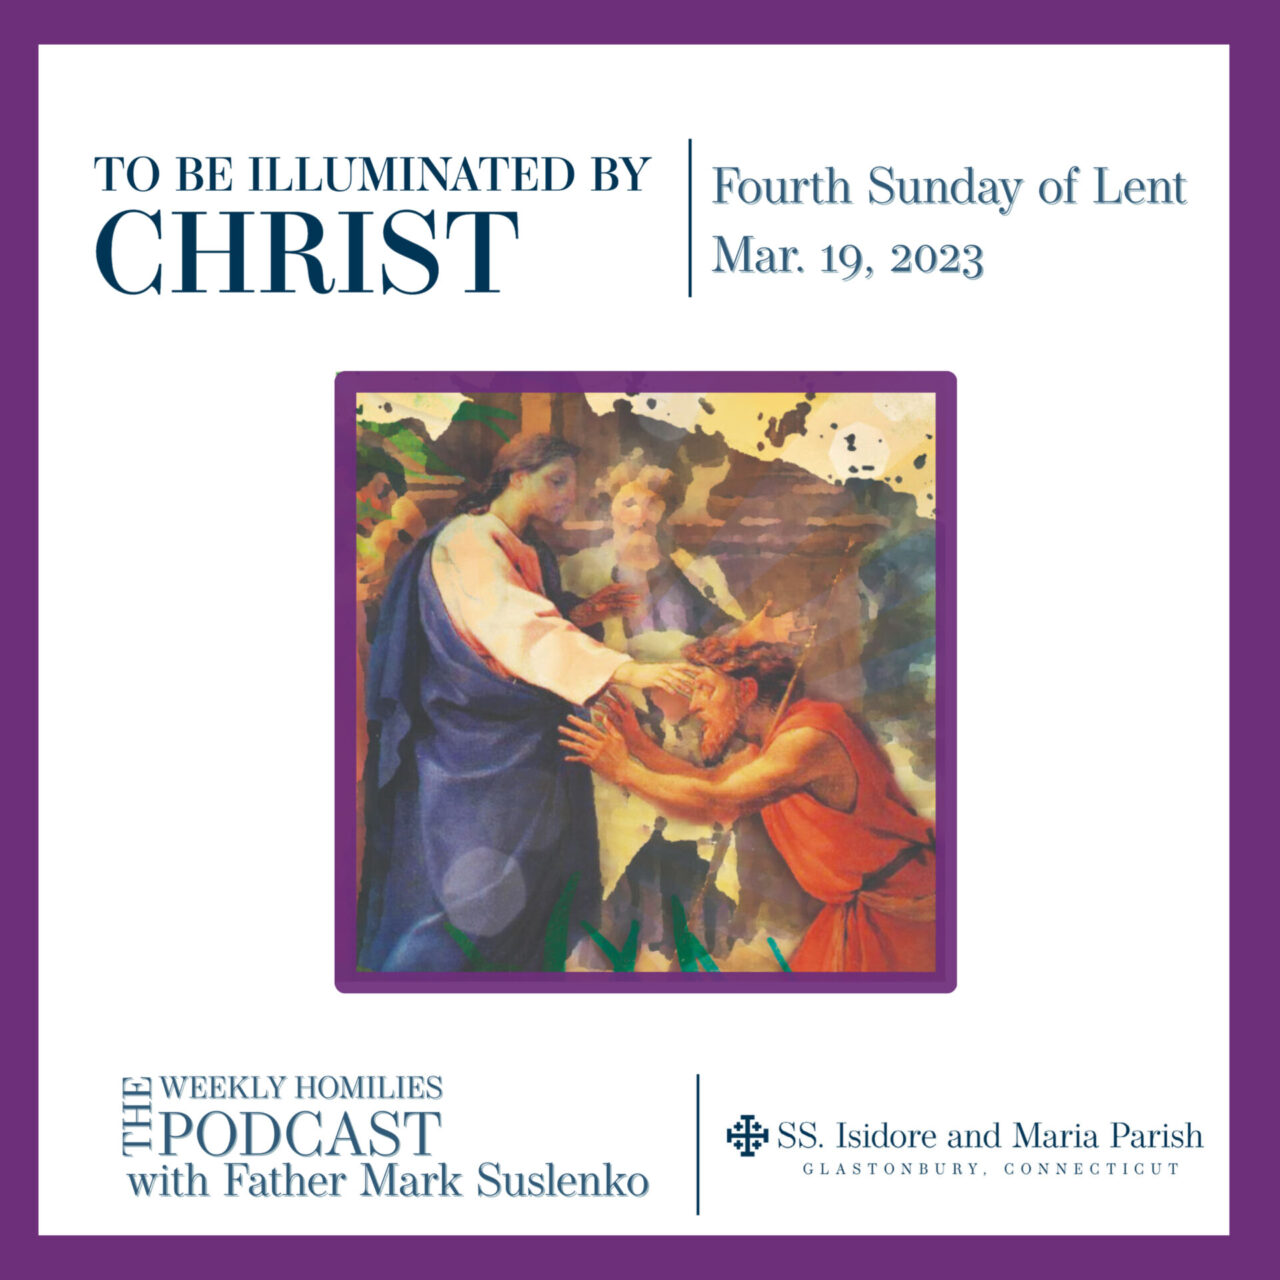 PODCAST: To Be Illuminated by Christ